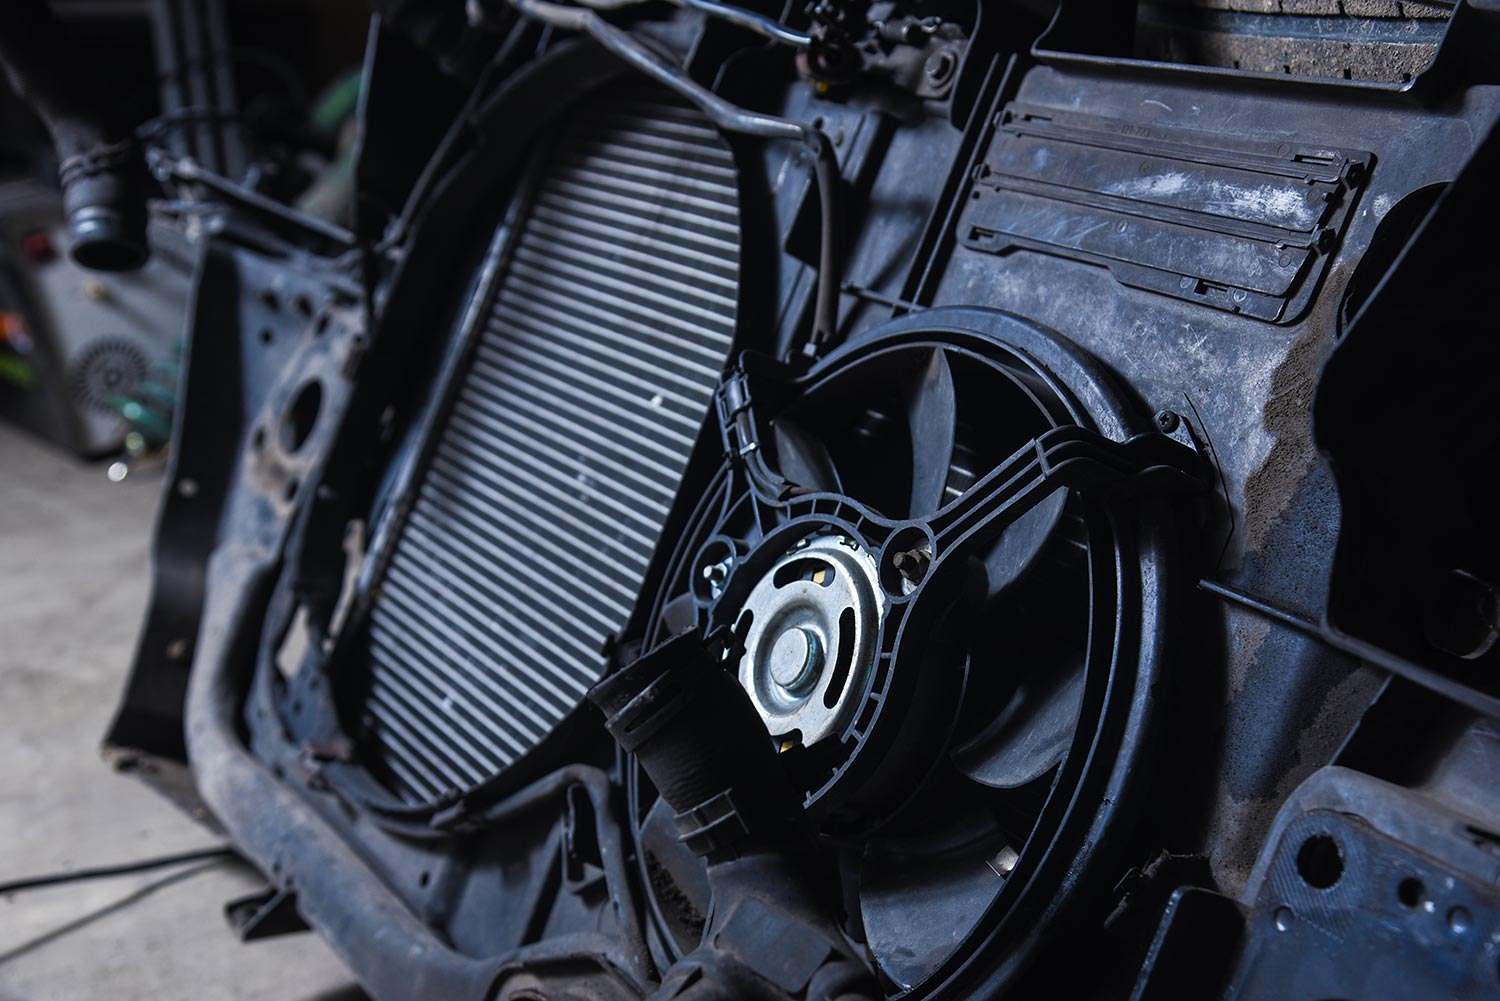 Radiator and motor cooling fan